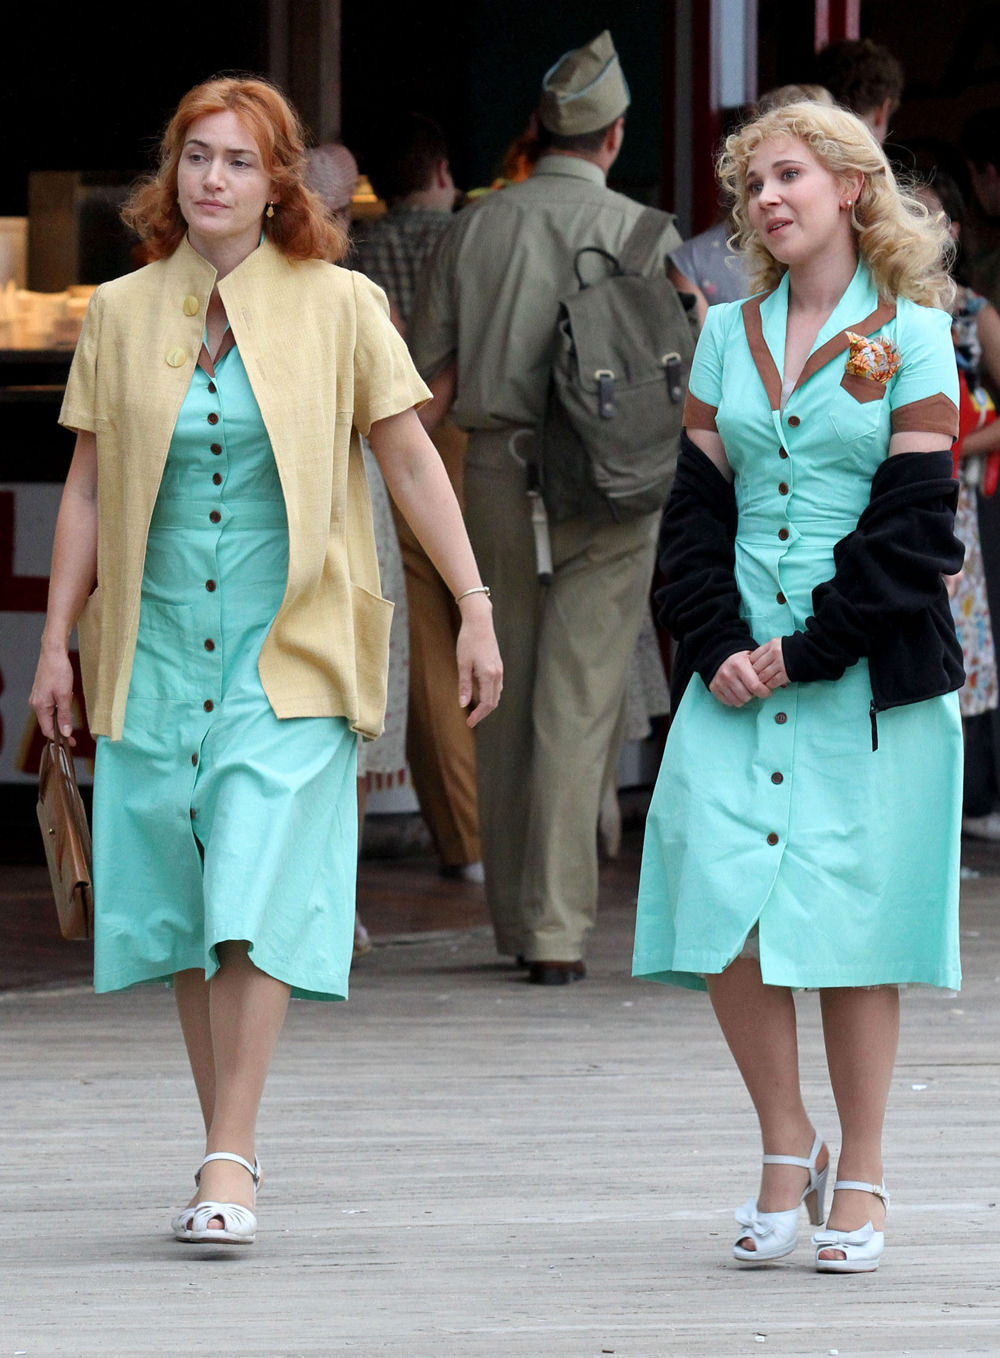 juno-temple-kate-winslet-movie-set-woody-allen-1950-untitled-project-tom-lorenzo-site-1